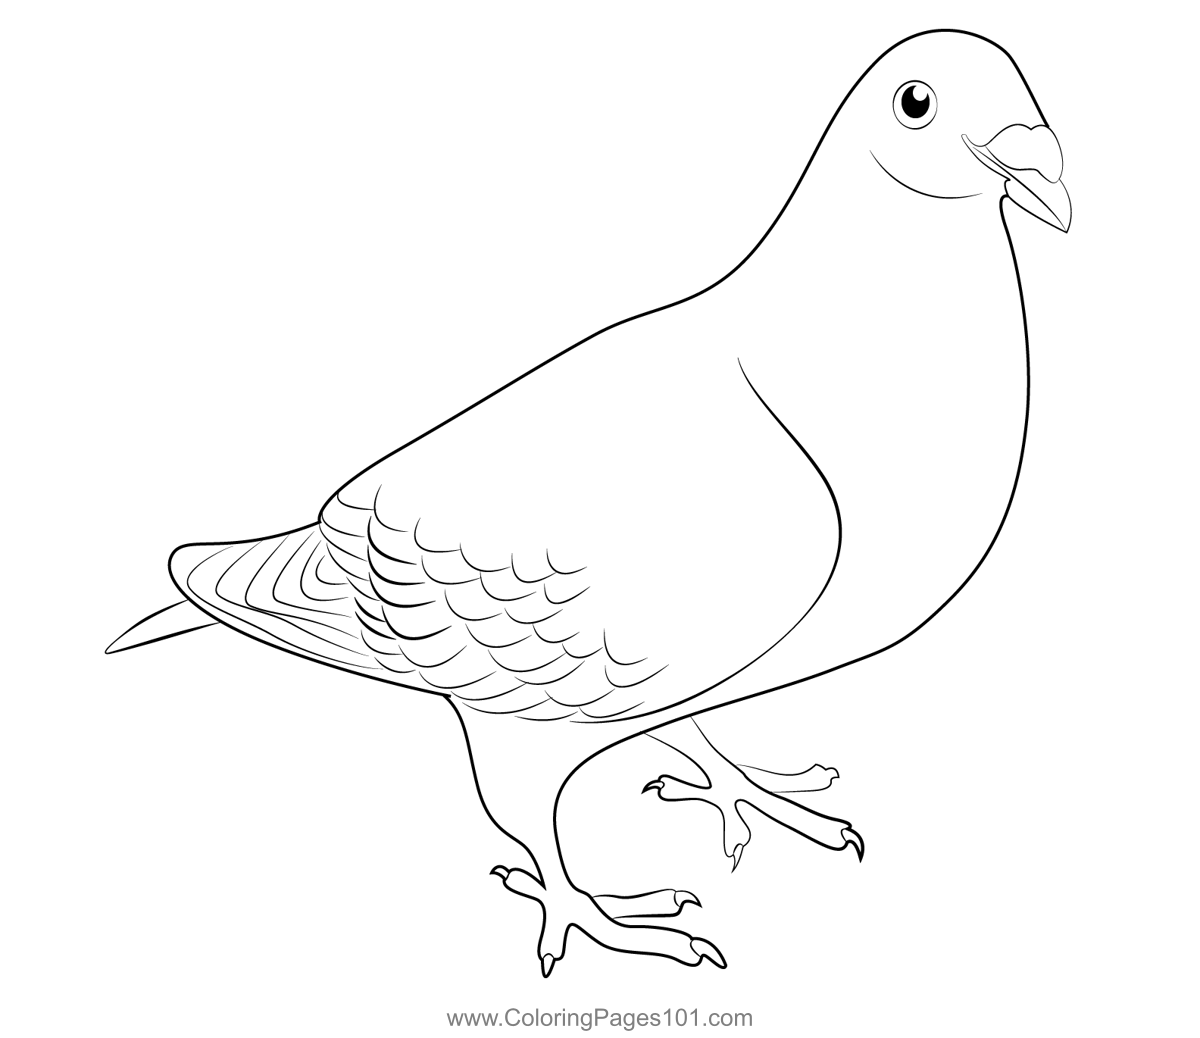 Racer Pigeon Coloring Page for Kids - Free Pigeons and Doves Printable ...